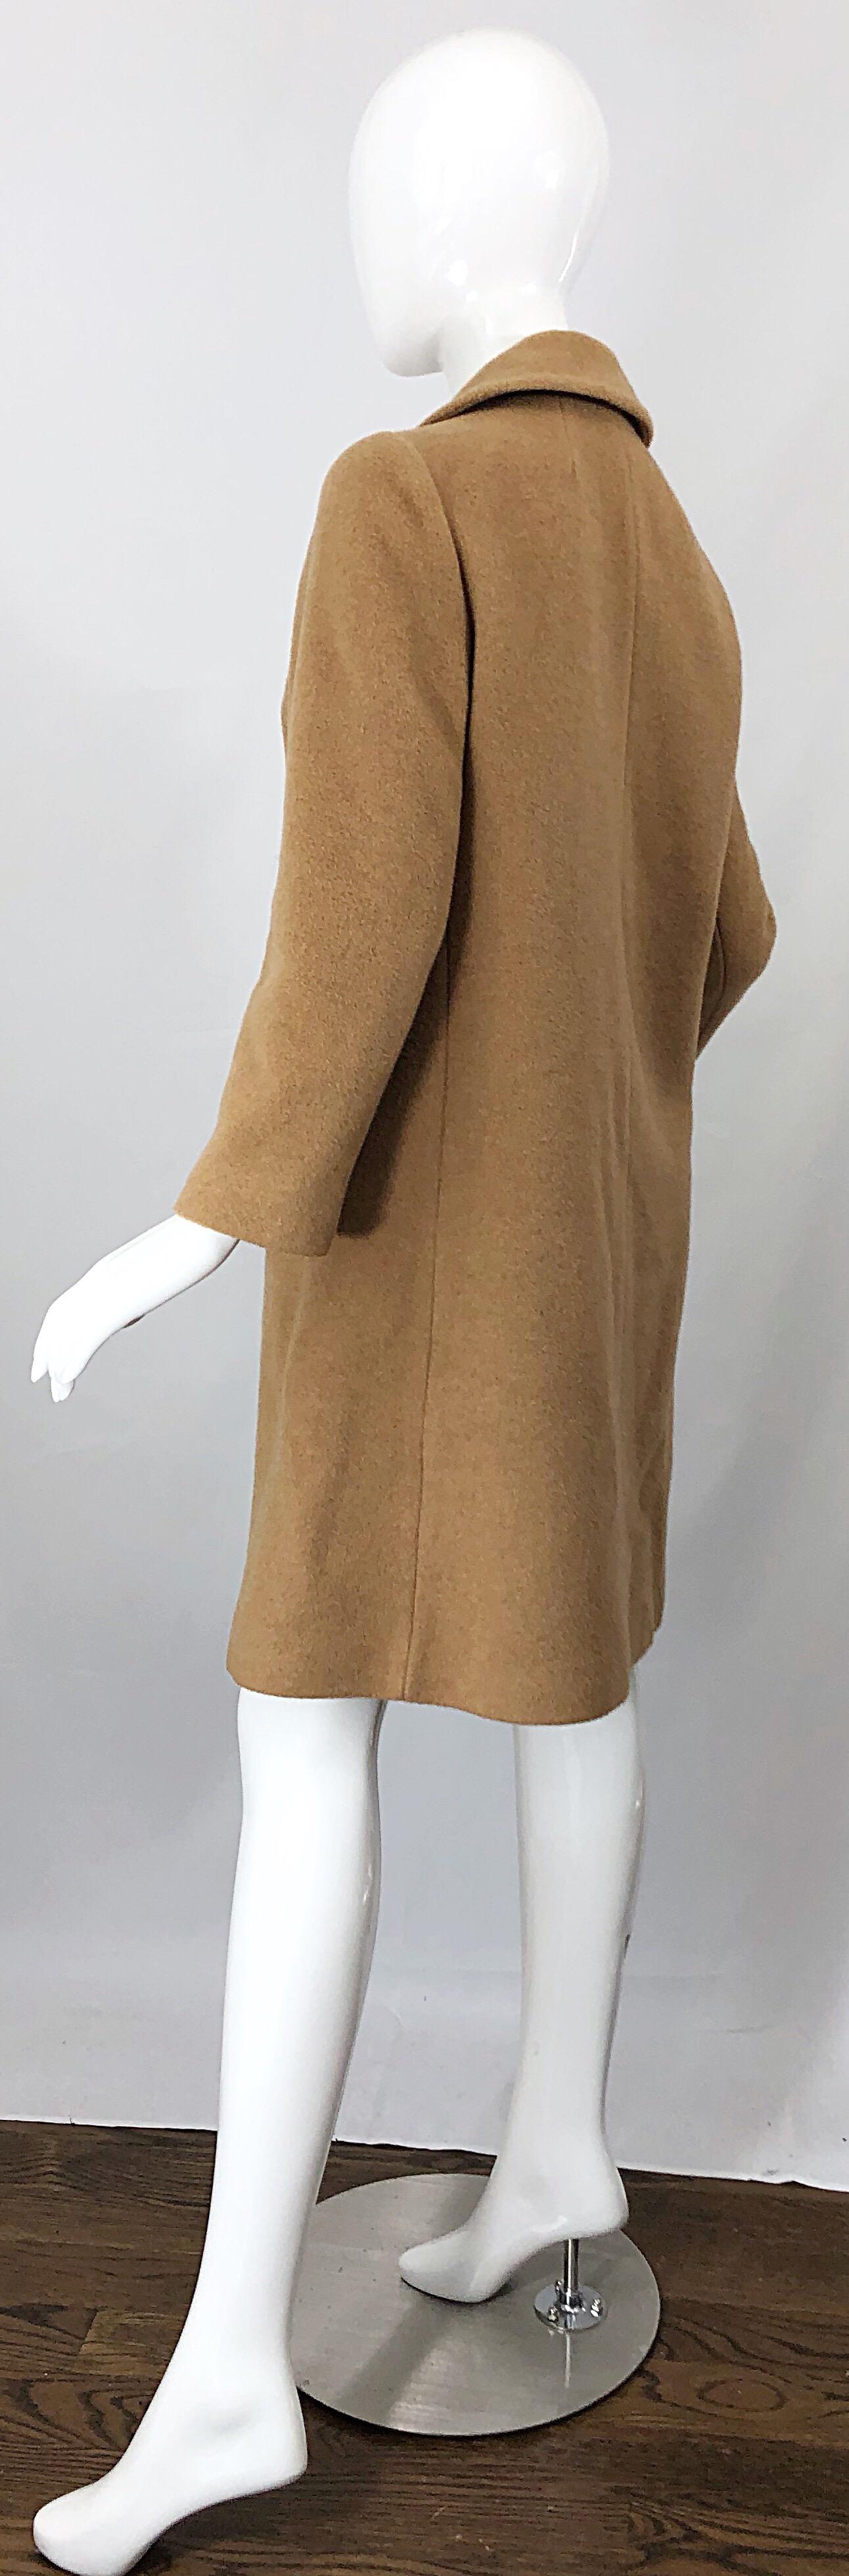 Chic 1960s Camel Tan Camels Hair Wool Double Breasted Vintage Swing Jacket Coat 8